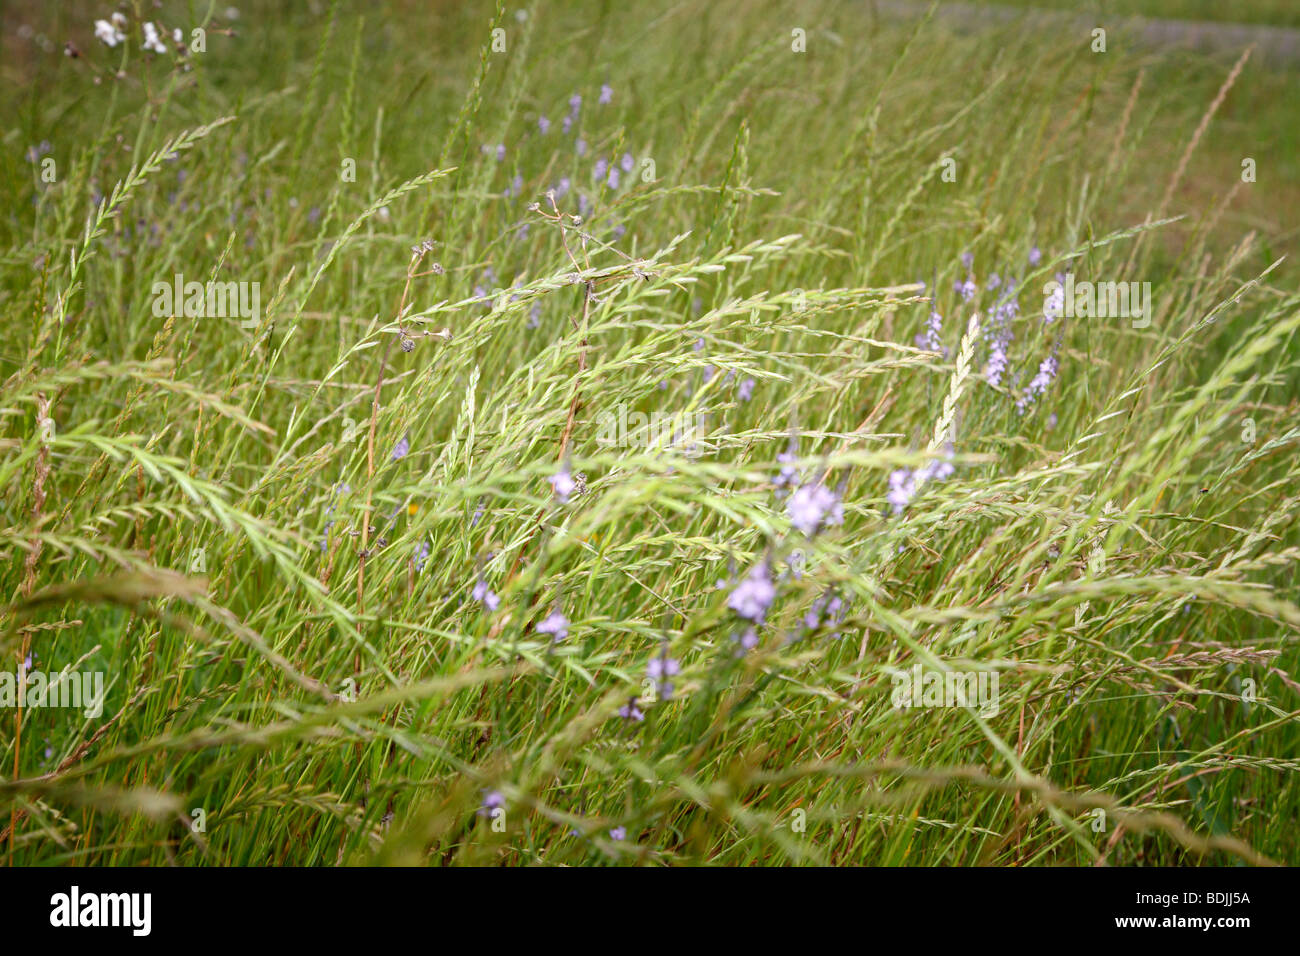 Close-up of Purple Flowers in Grassy Field Banque D'Images